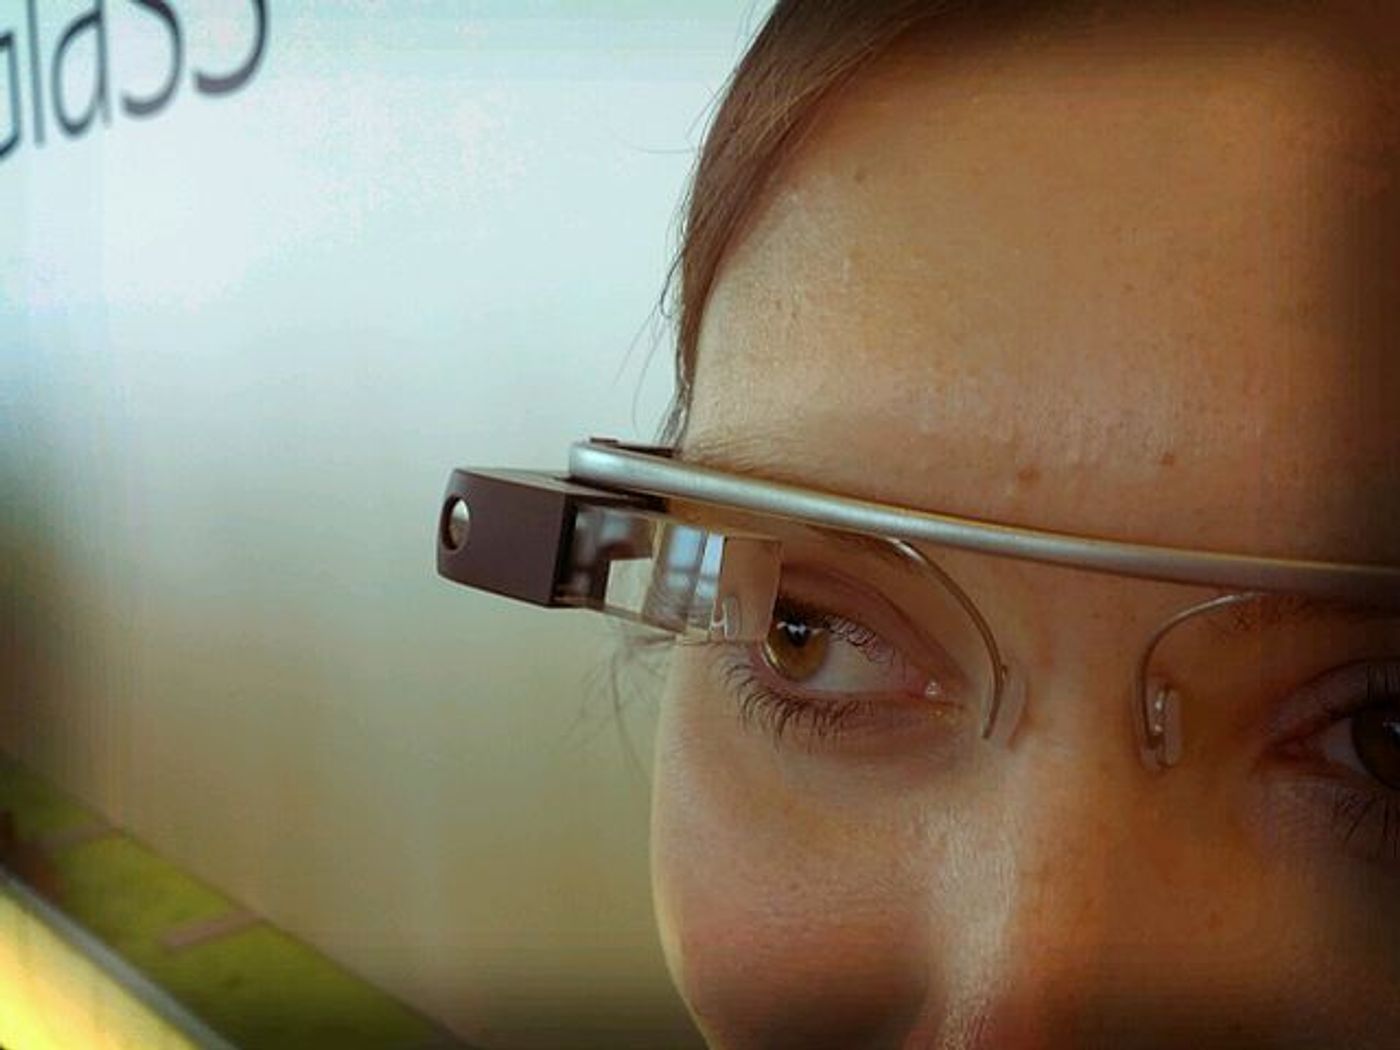 Stanford researchers are looking to Google Glass for autism therapy